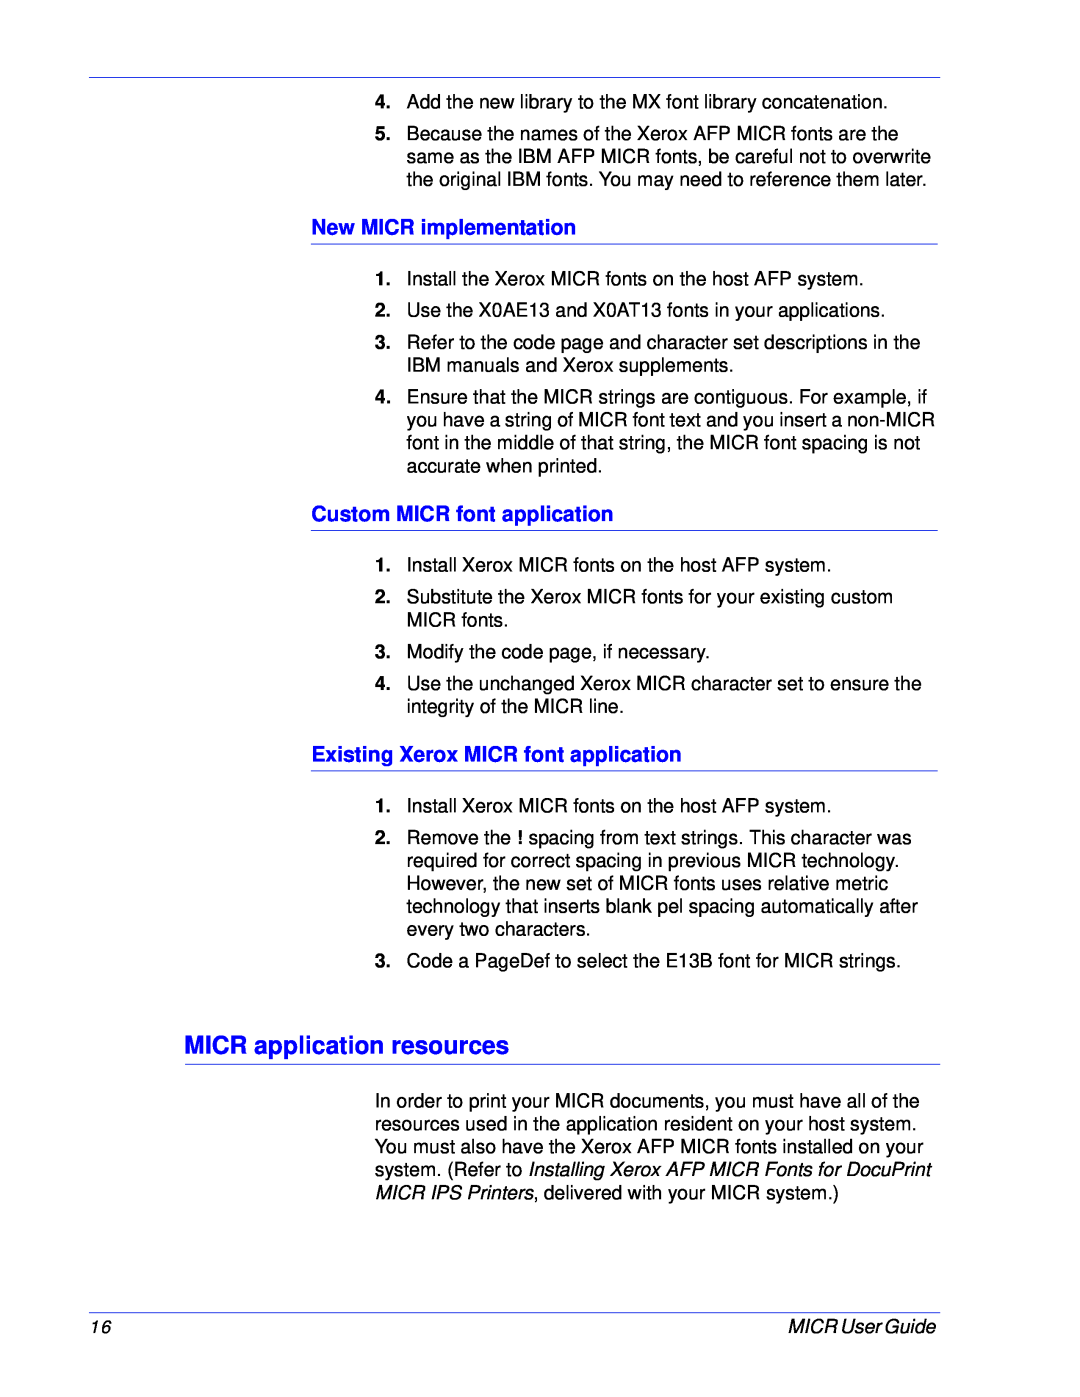 Xerox 701P47409 manual MICR application resources, New MICR implementation, Custom MICR font application 